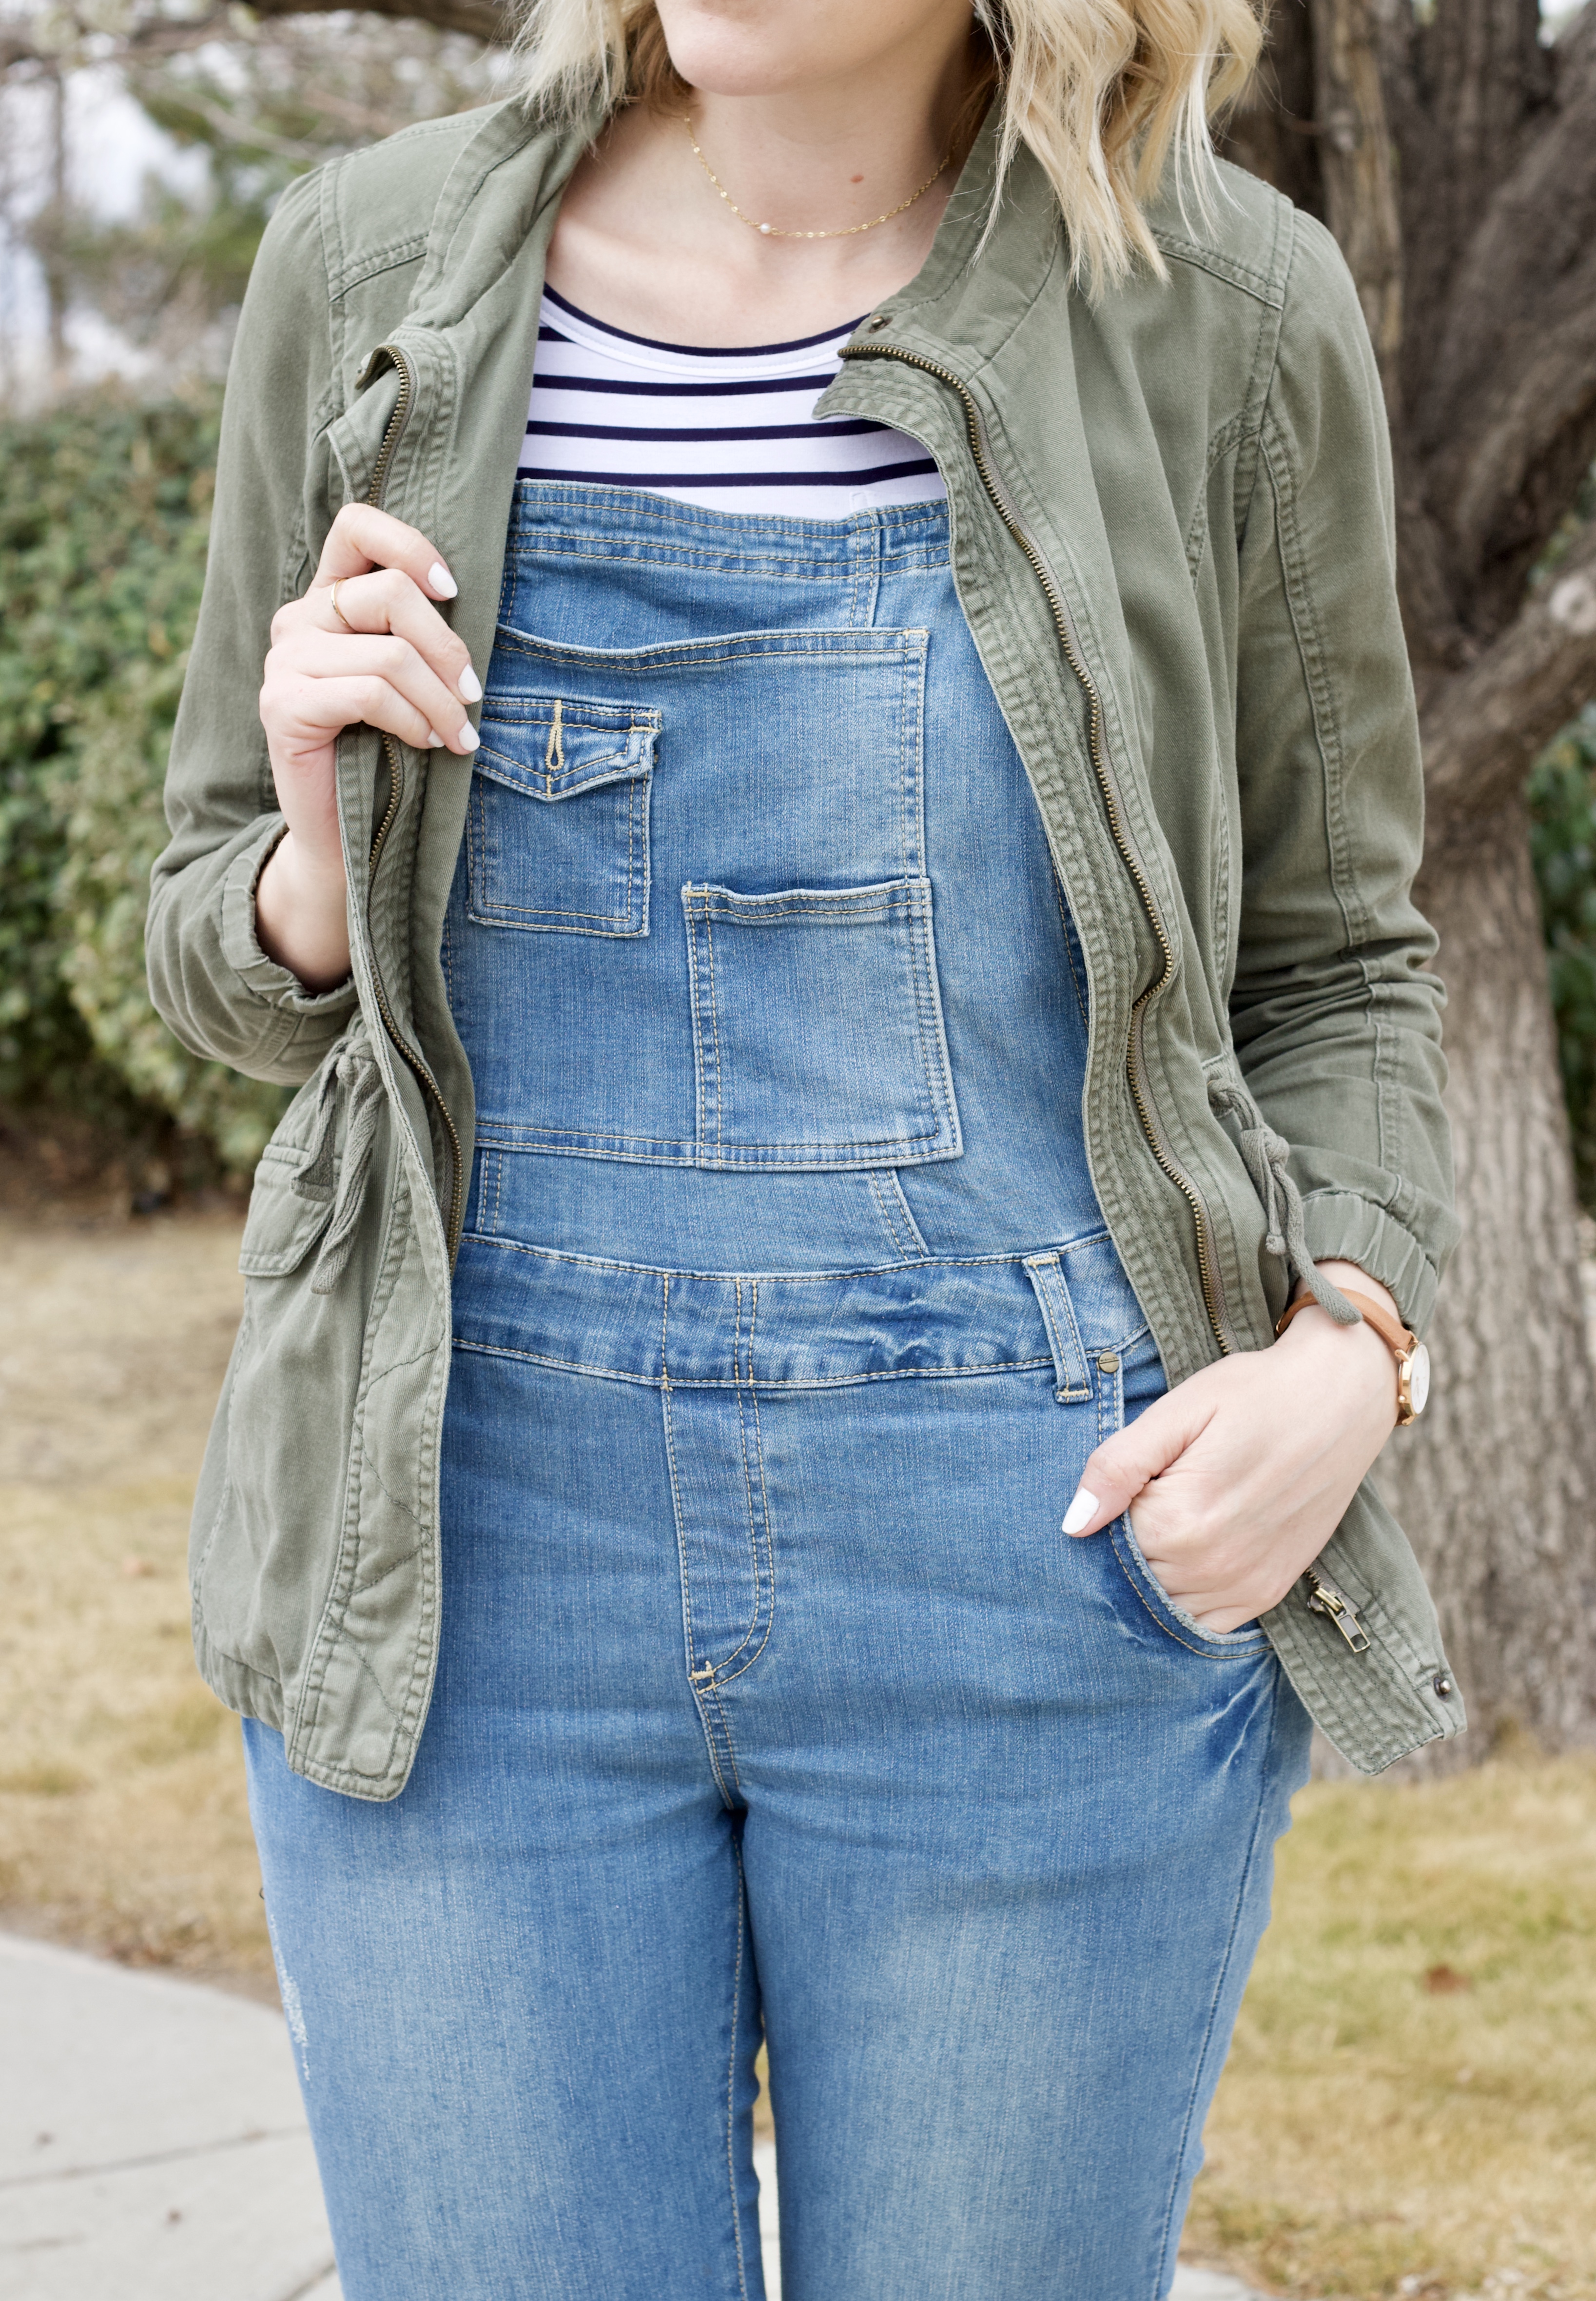 overalls outfit for spring #overalls #springstyle #springoutfit